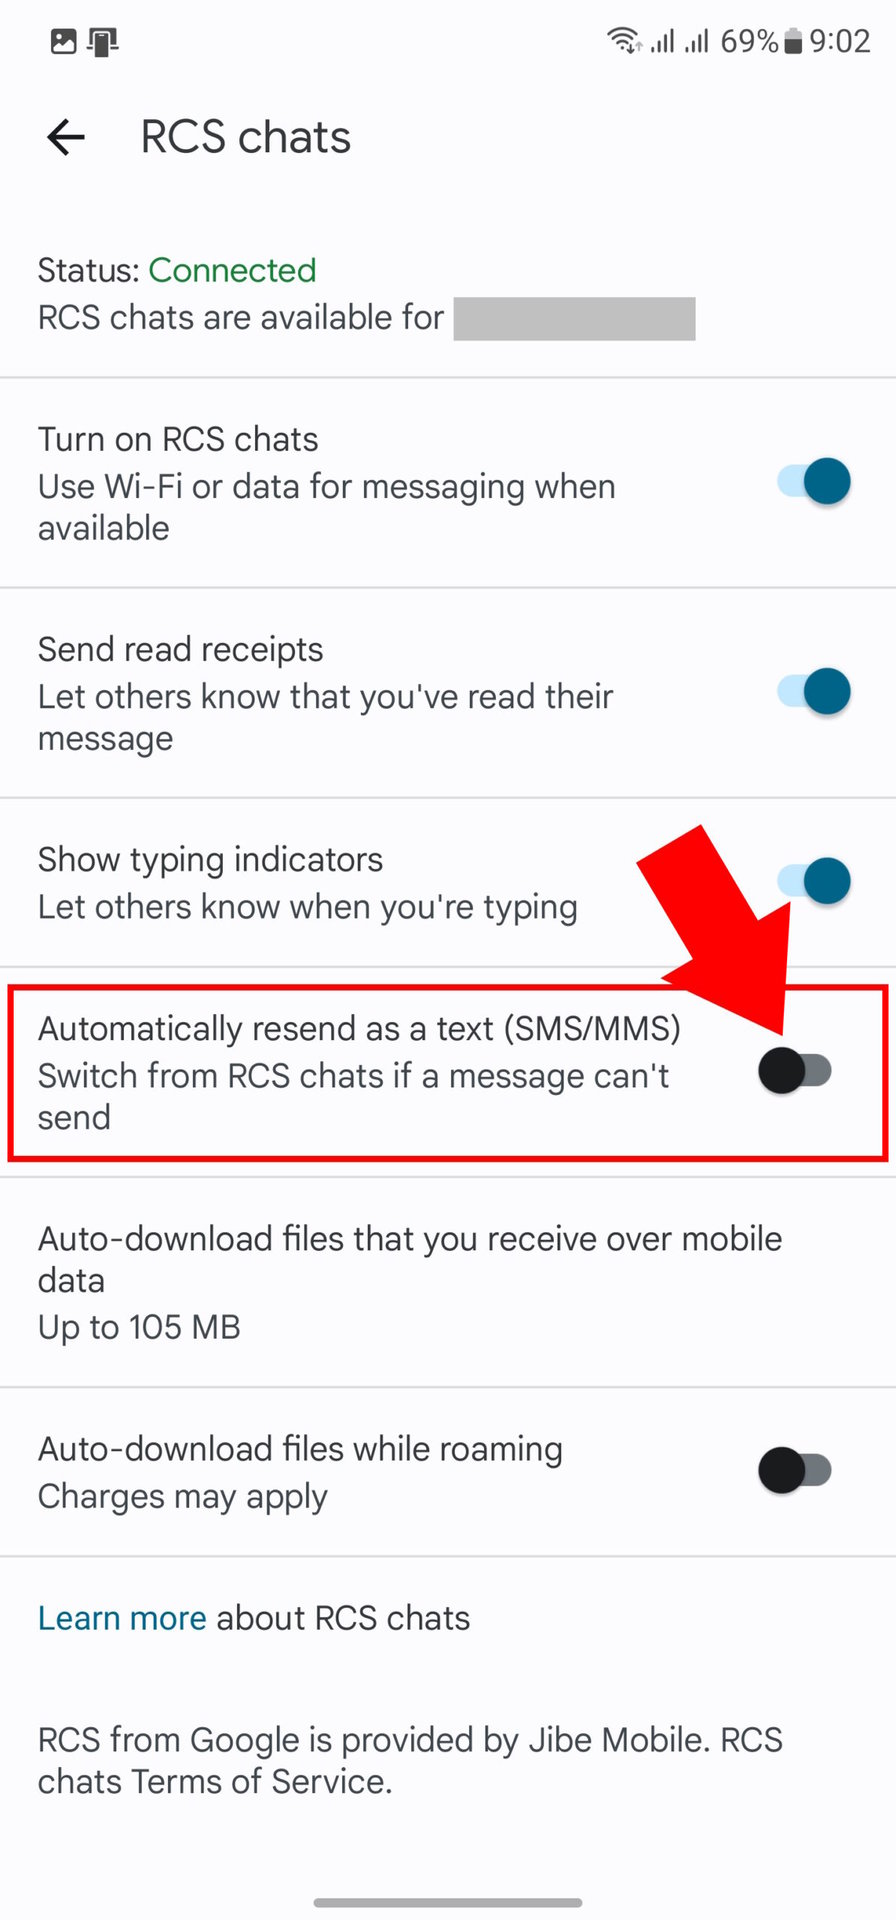 How to turn off SMS fallback on RCS to stop sent as sms via server messages 5